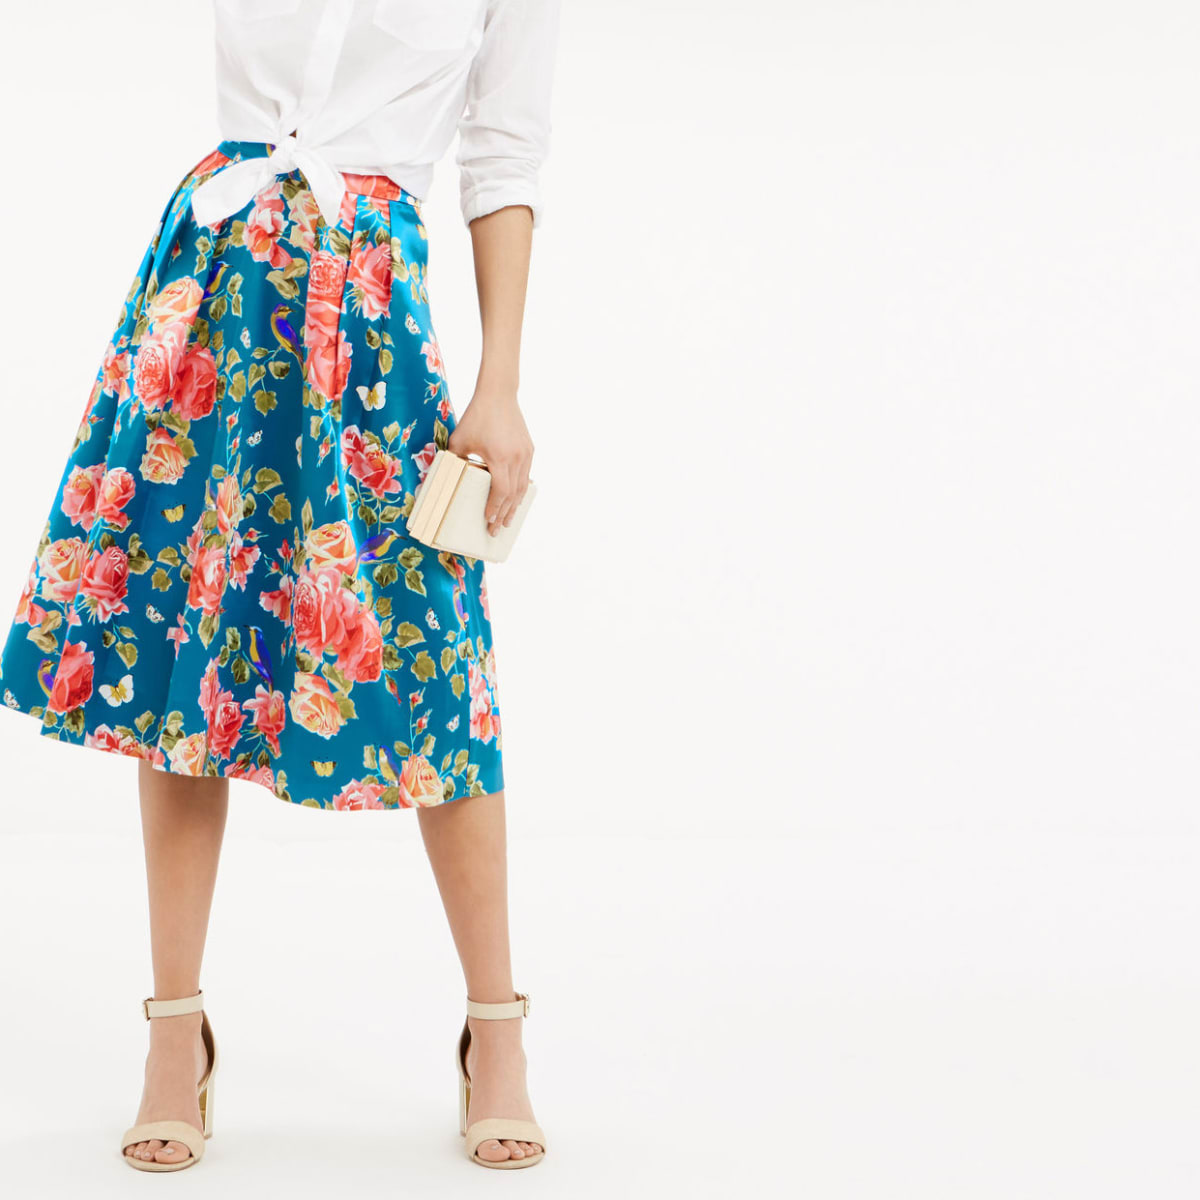 Summer Skirts for Every Style ...